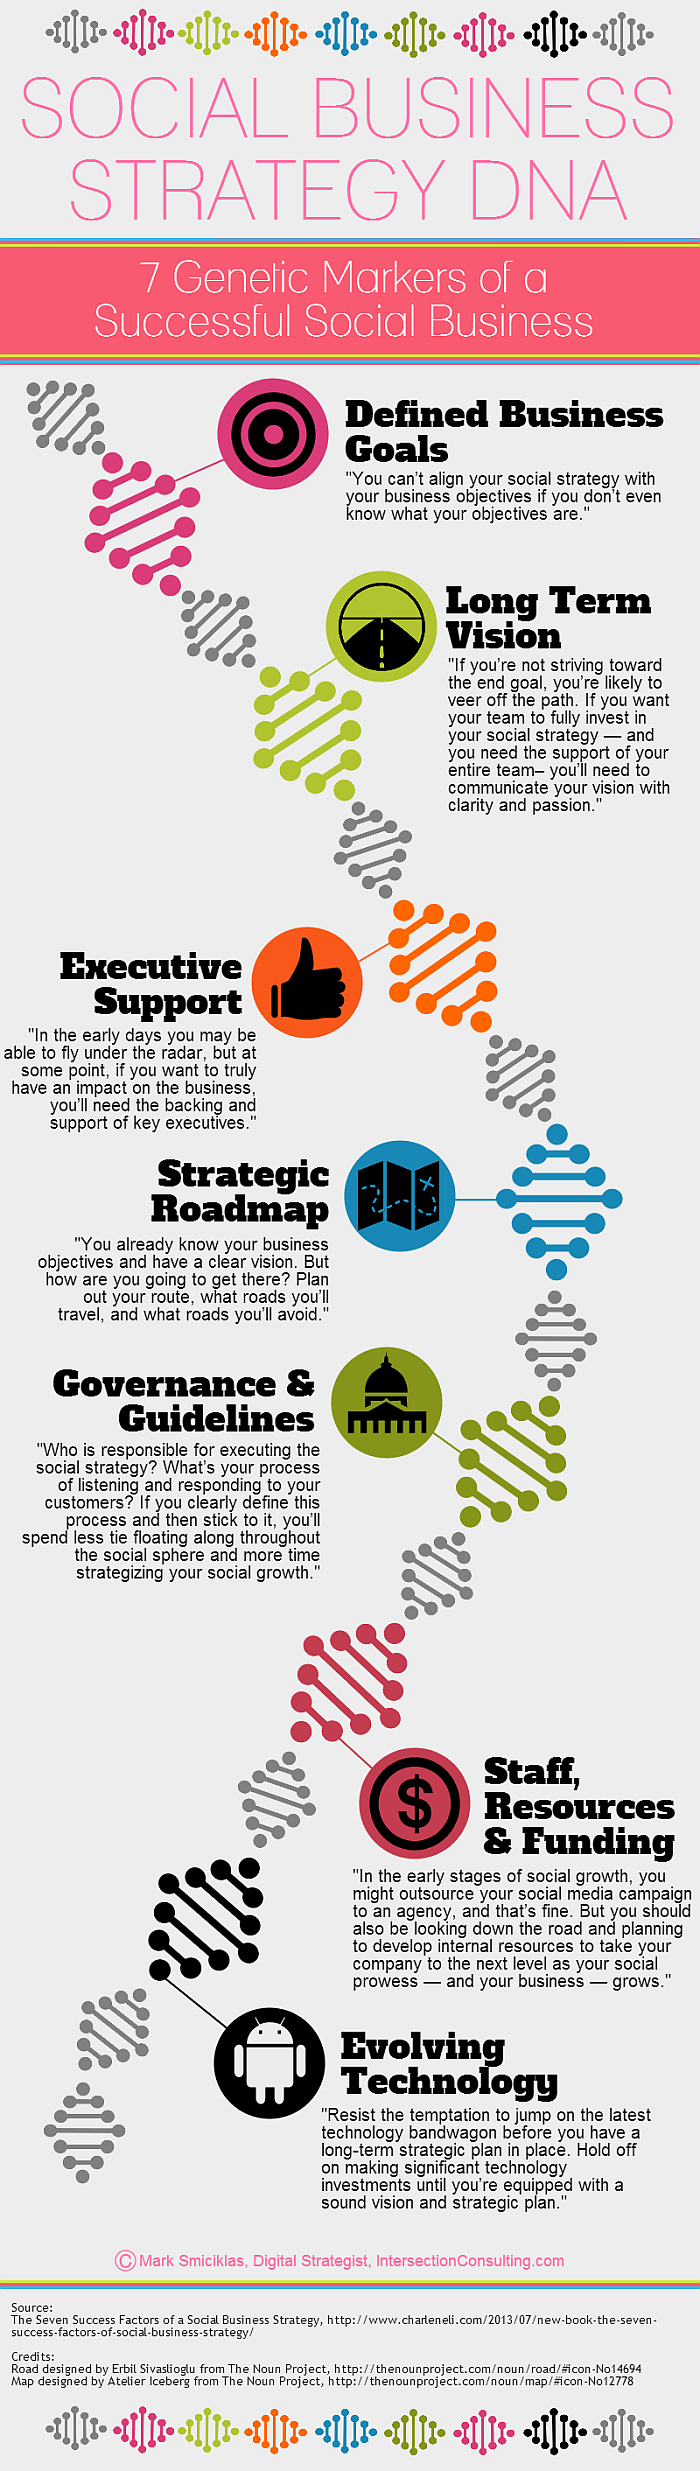 Social-Business-Strategy-DNA-700p